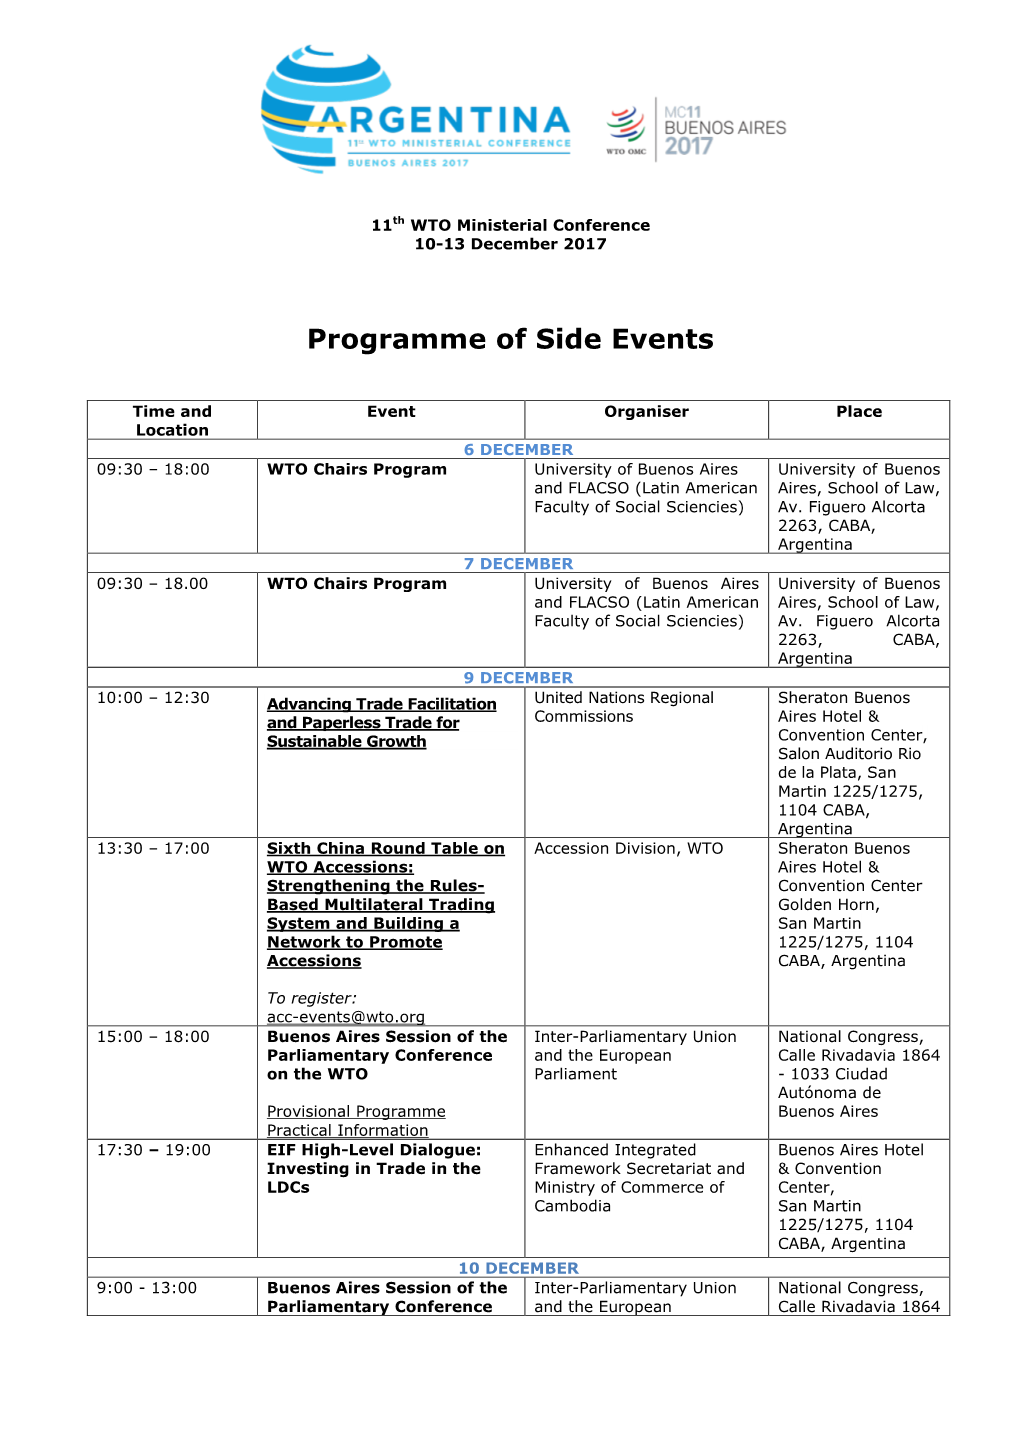 Programme of Side Events